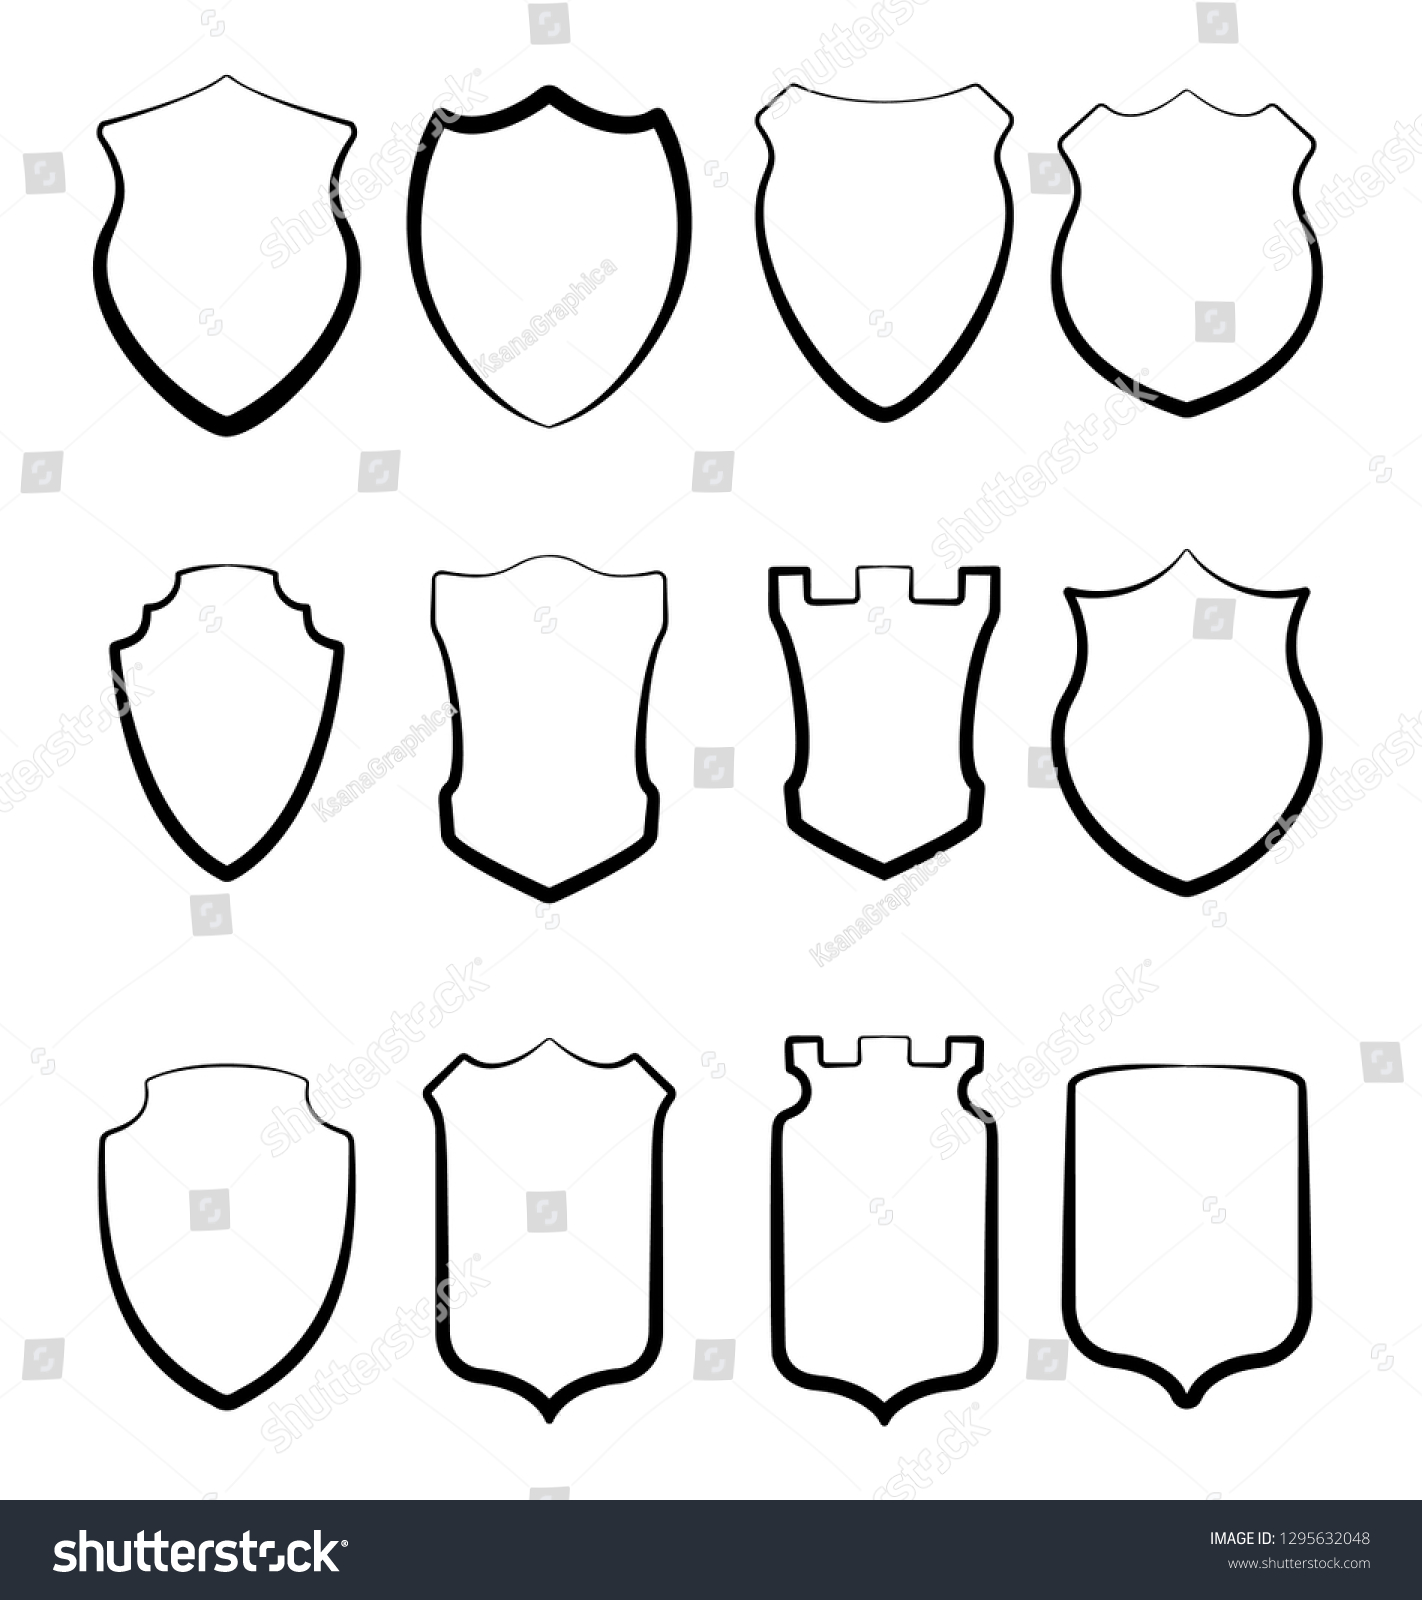 Heraldic Shields Collection Crests Silhouettes Signs Stock Vector ...